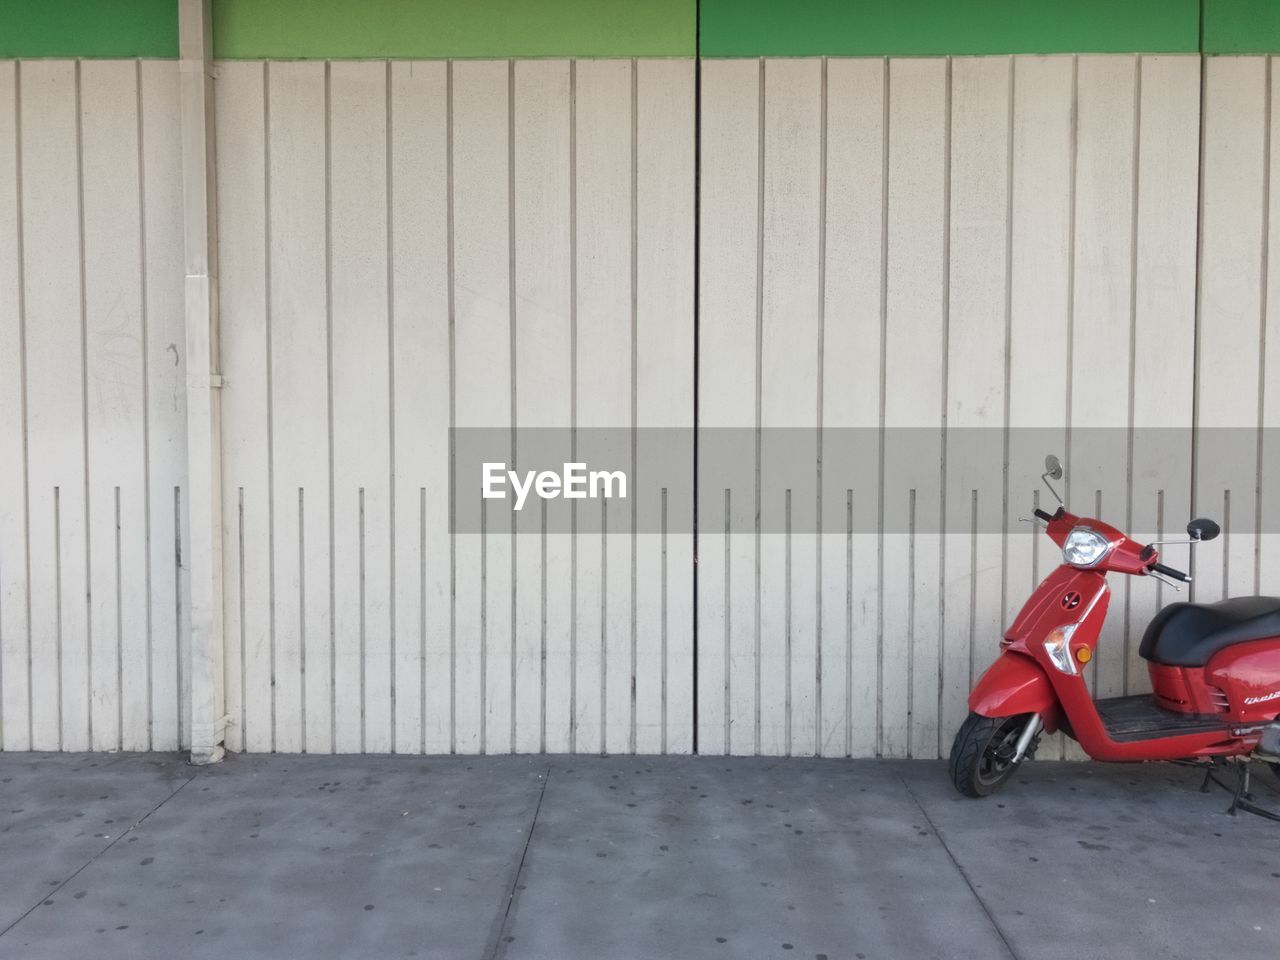 Motor scooter parked by wall